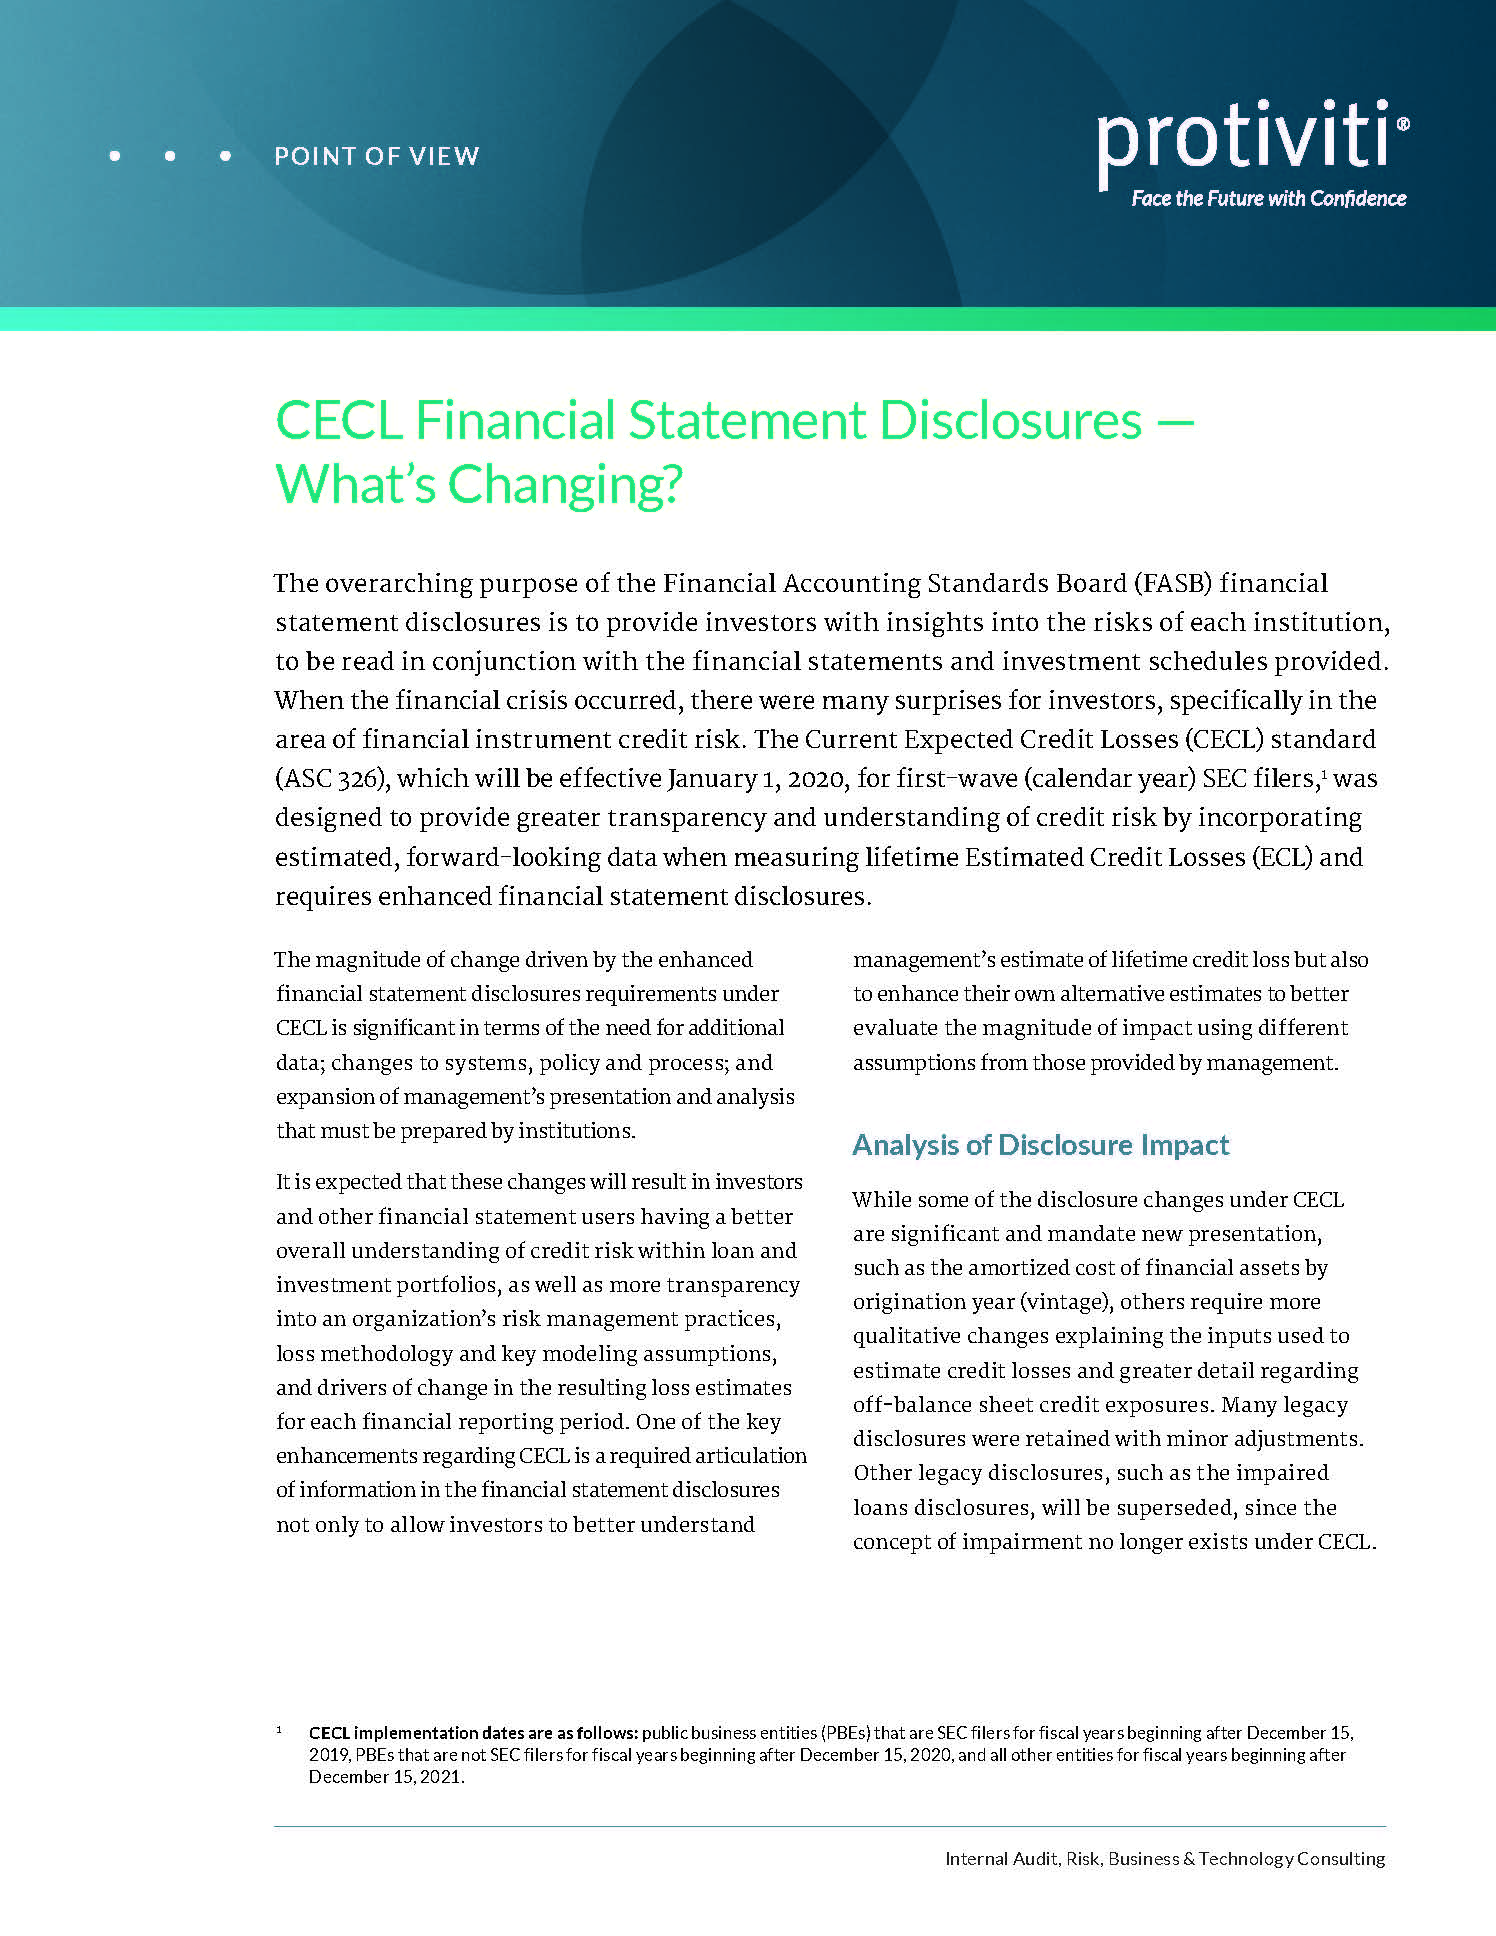 Screenshot of the first page of CECL Financial Statement Disclosures — What’s Changing?